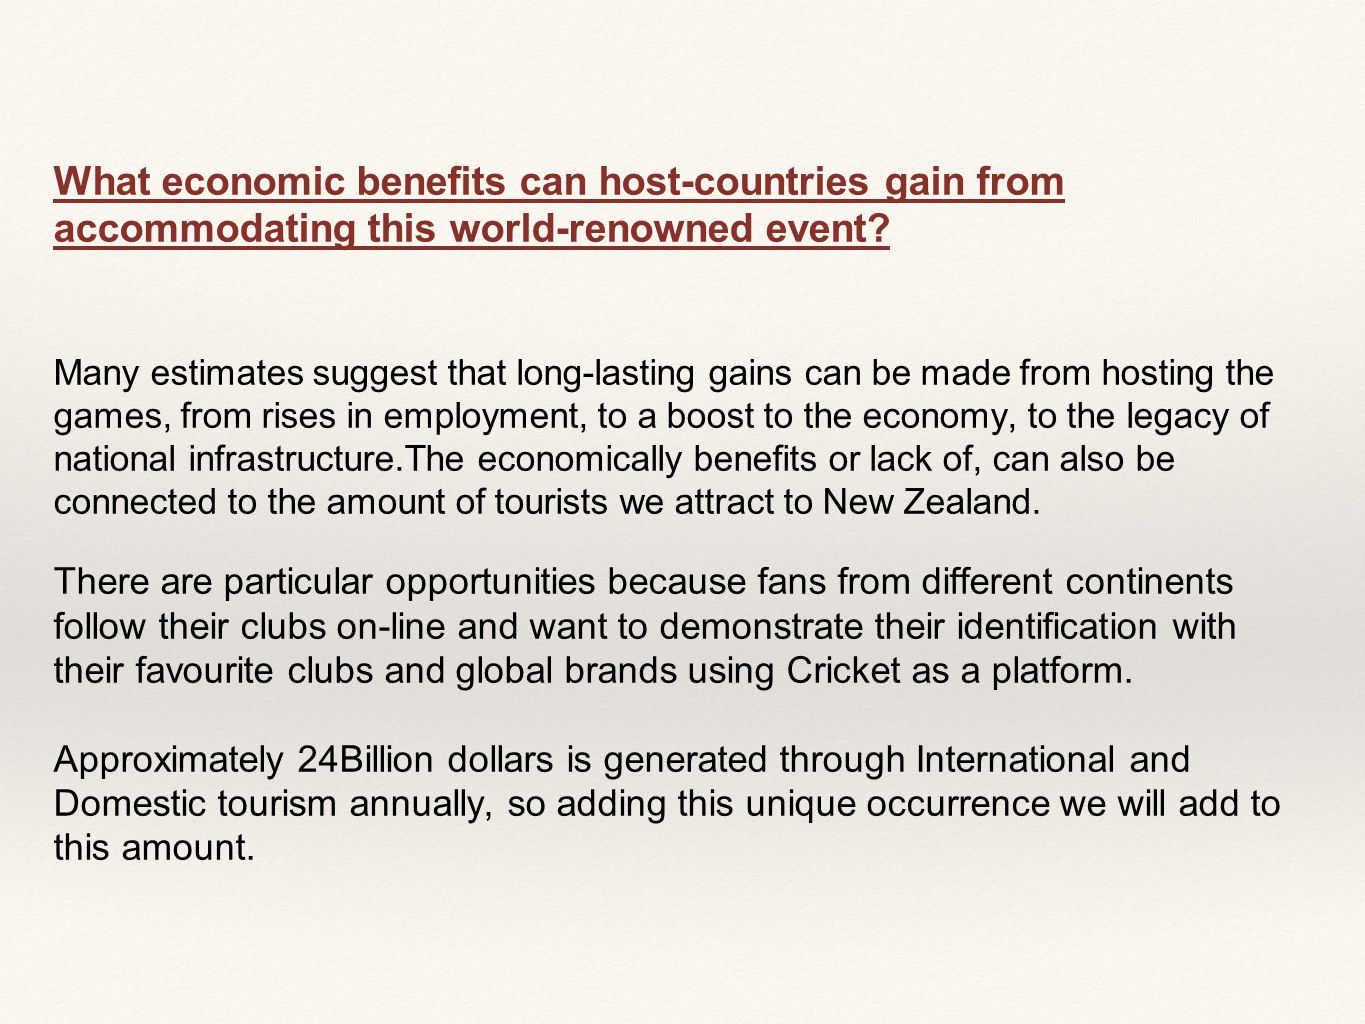 What economic benefits can host-countries gain from accommodating this world-renowned event.